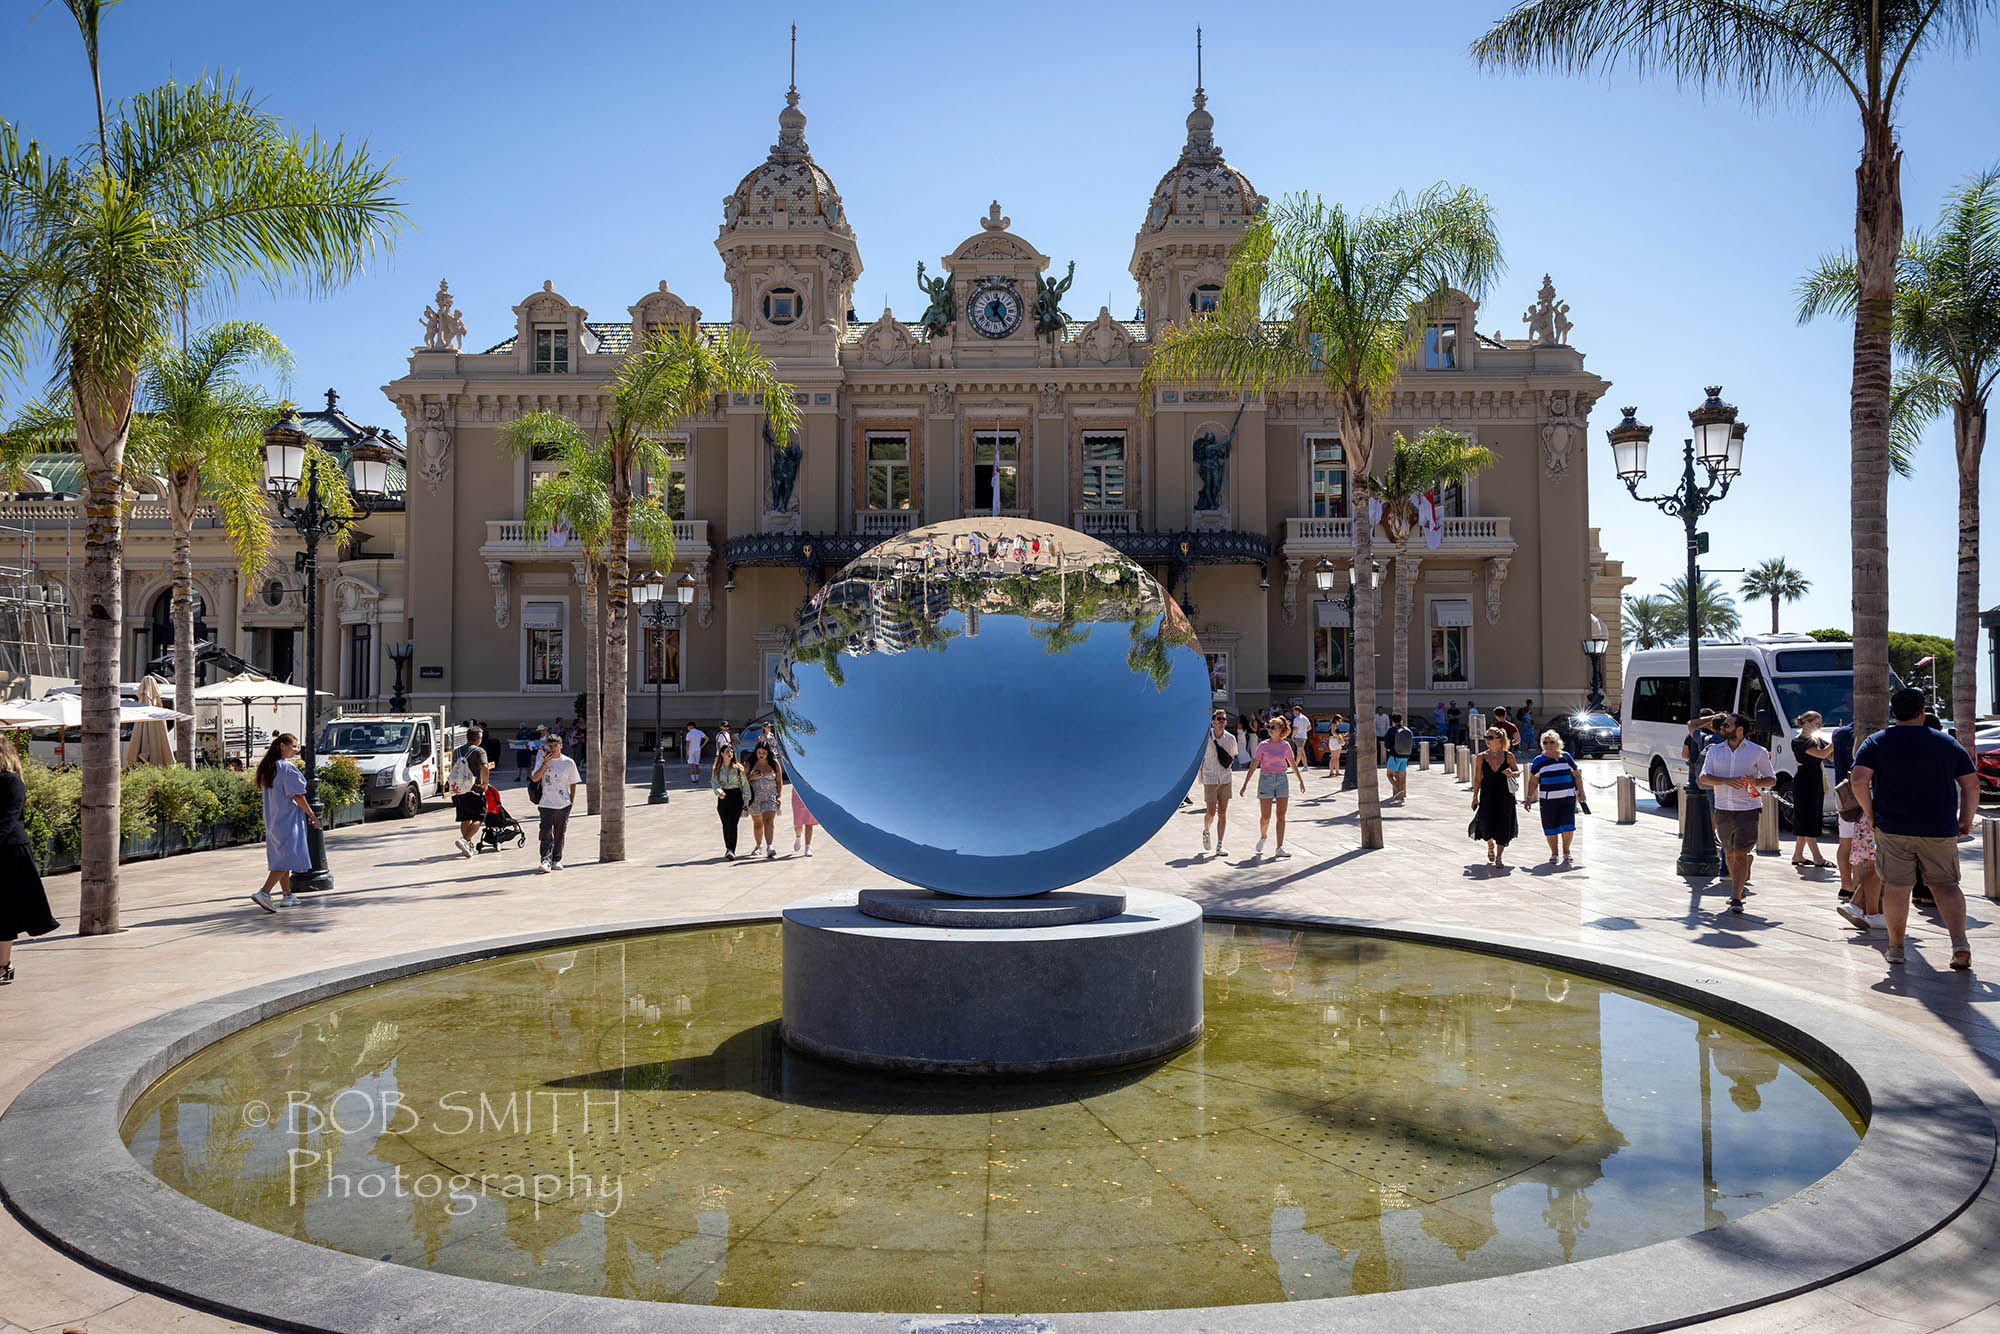 The Sky Mirror sculpture by Anish Kapoor stands in front of the Casino in Monte Carlo, Monaco, where only foreigners are allowed to bet